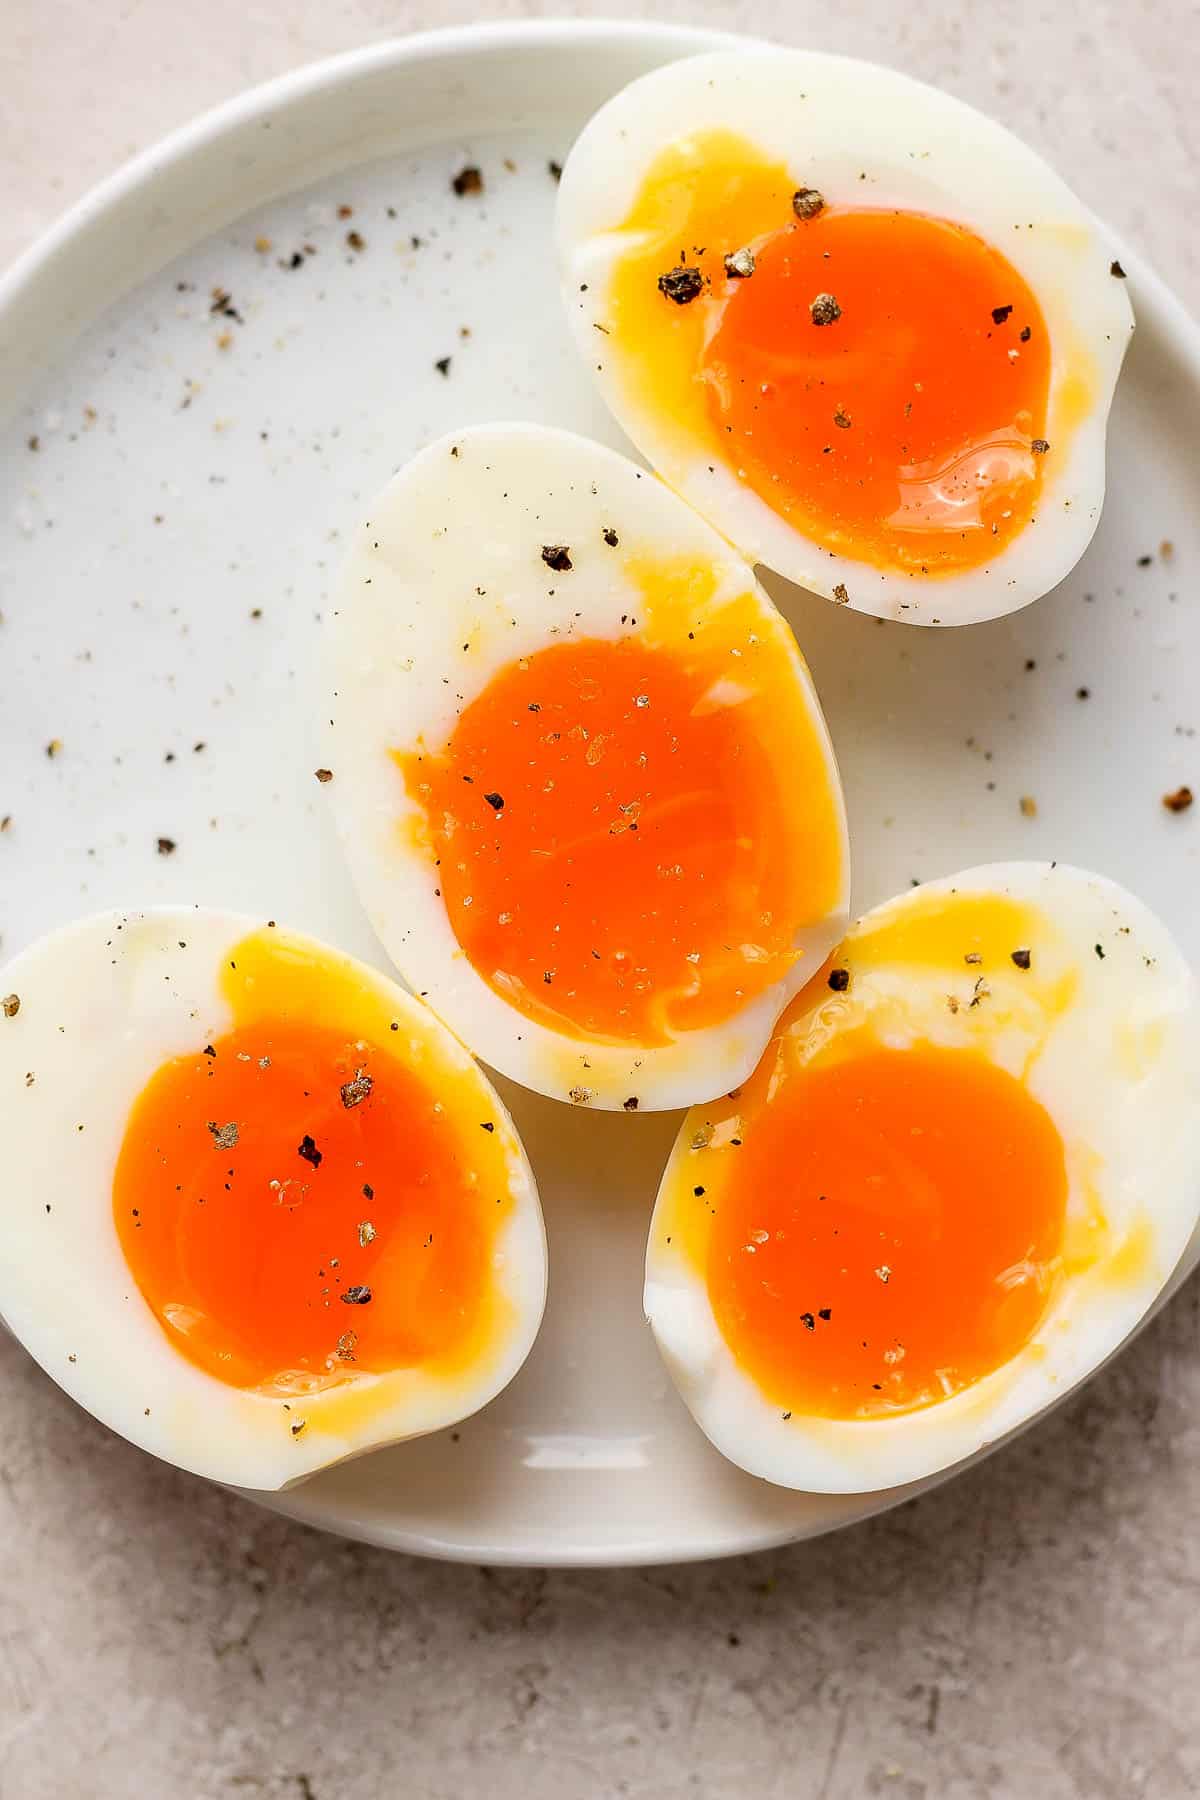 Two, 6-minute eggs peeled and cut in half on a plate with some cracked pepper on top.